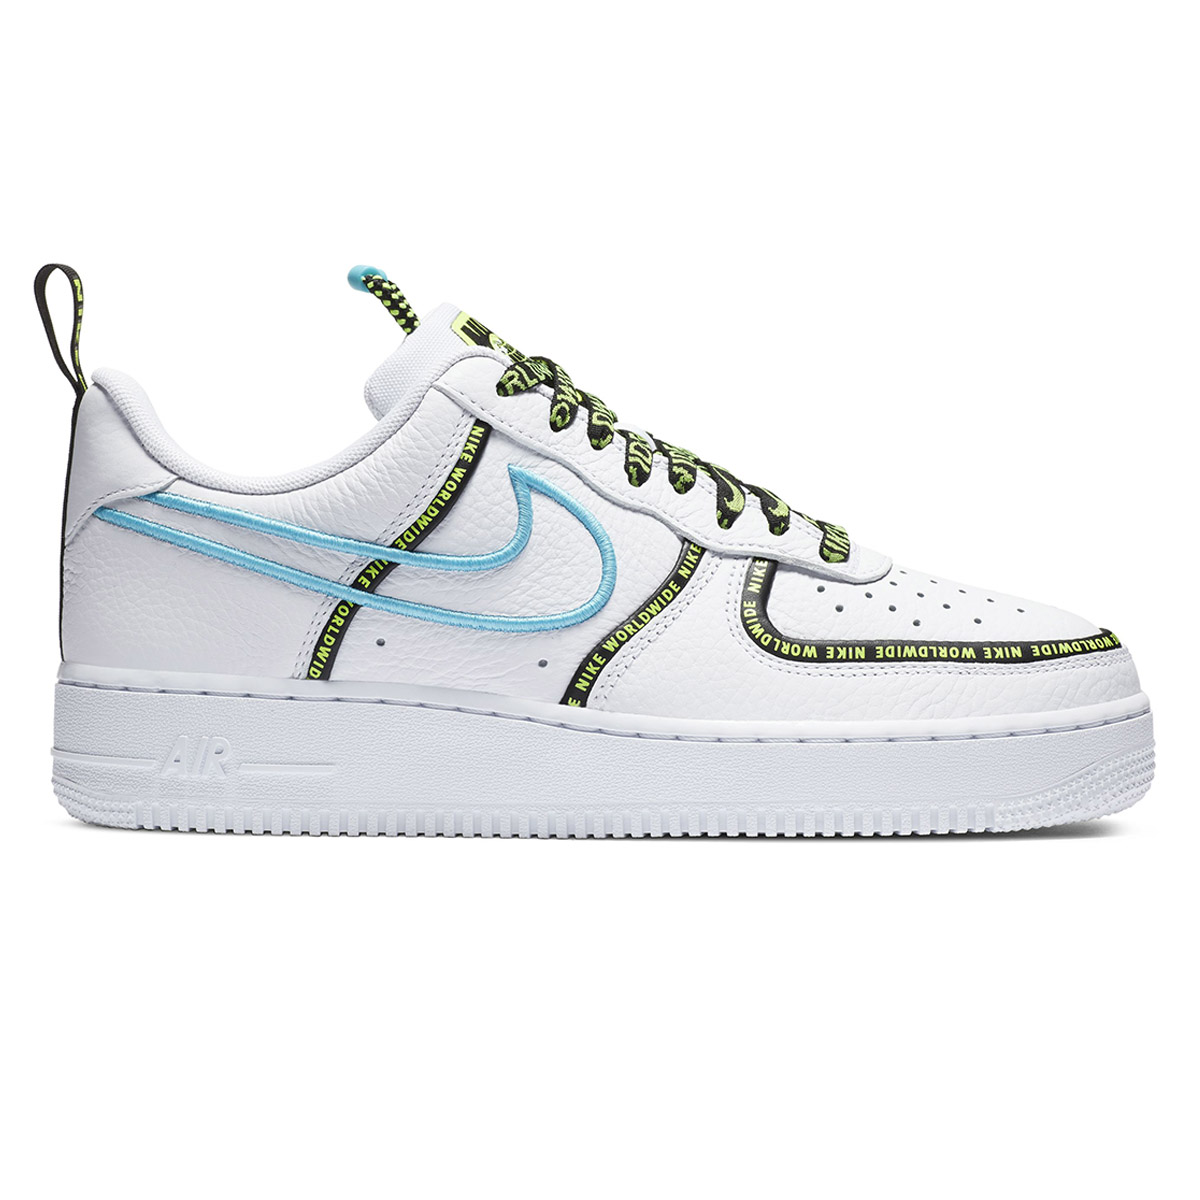 Zapatillas Nike Air Force 1 '07 Worldwide Blue Fury,  image number null